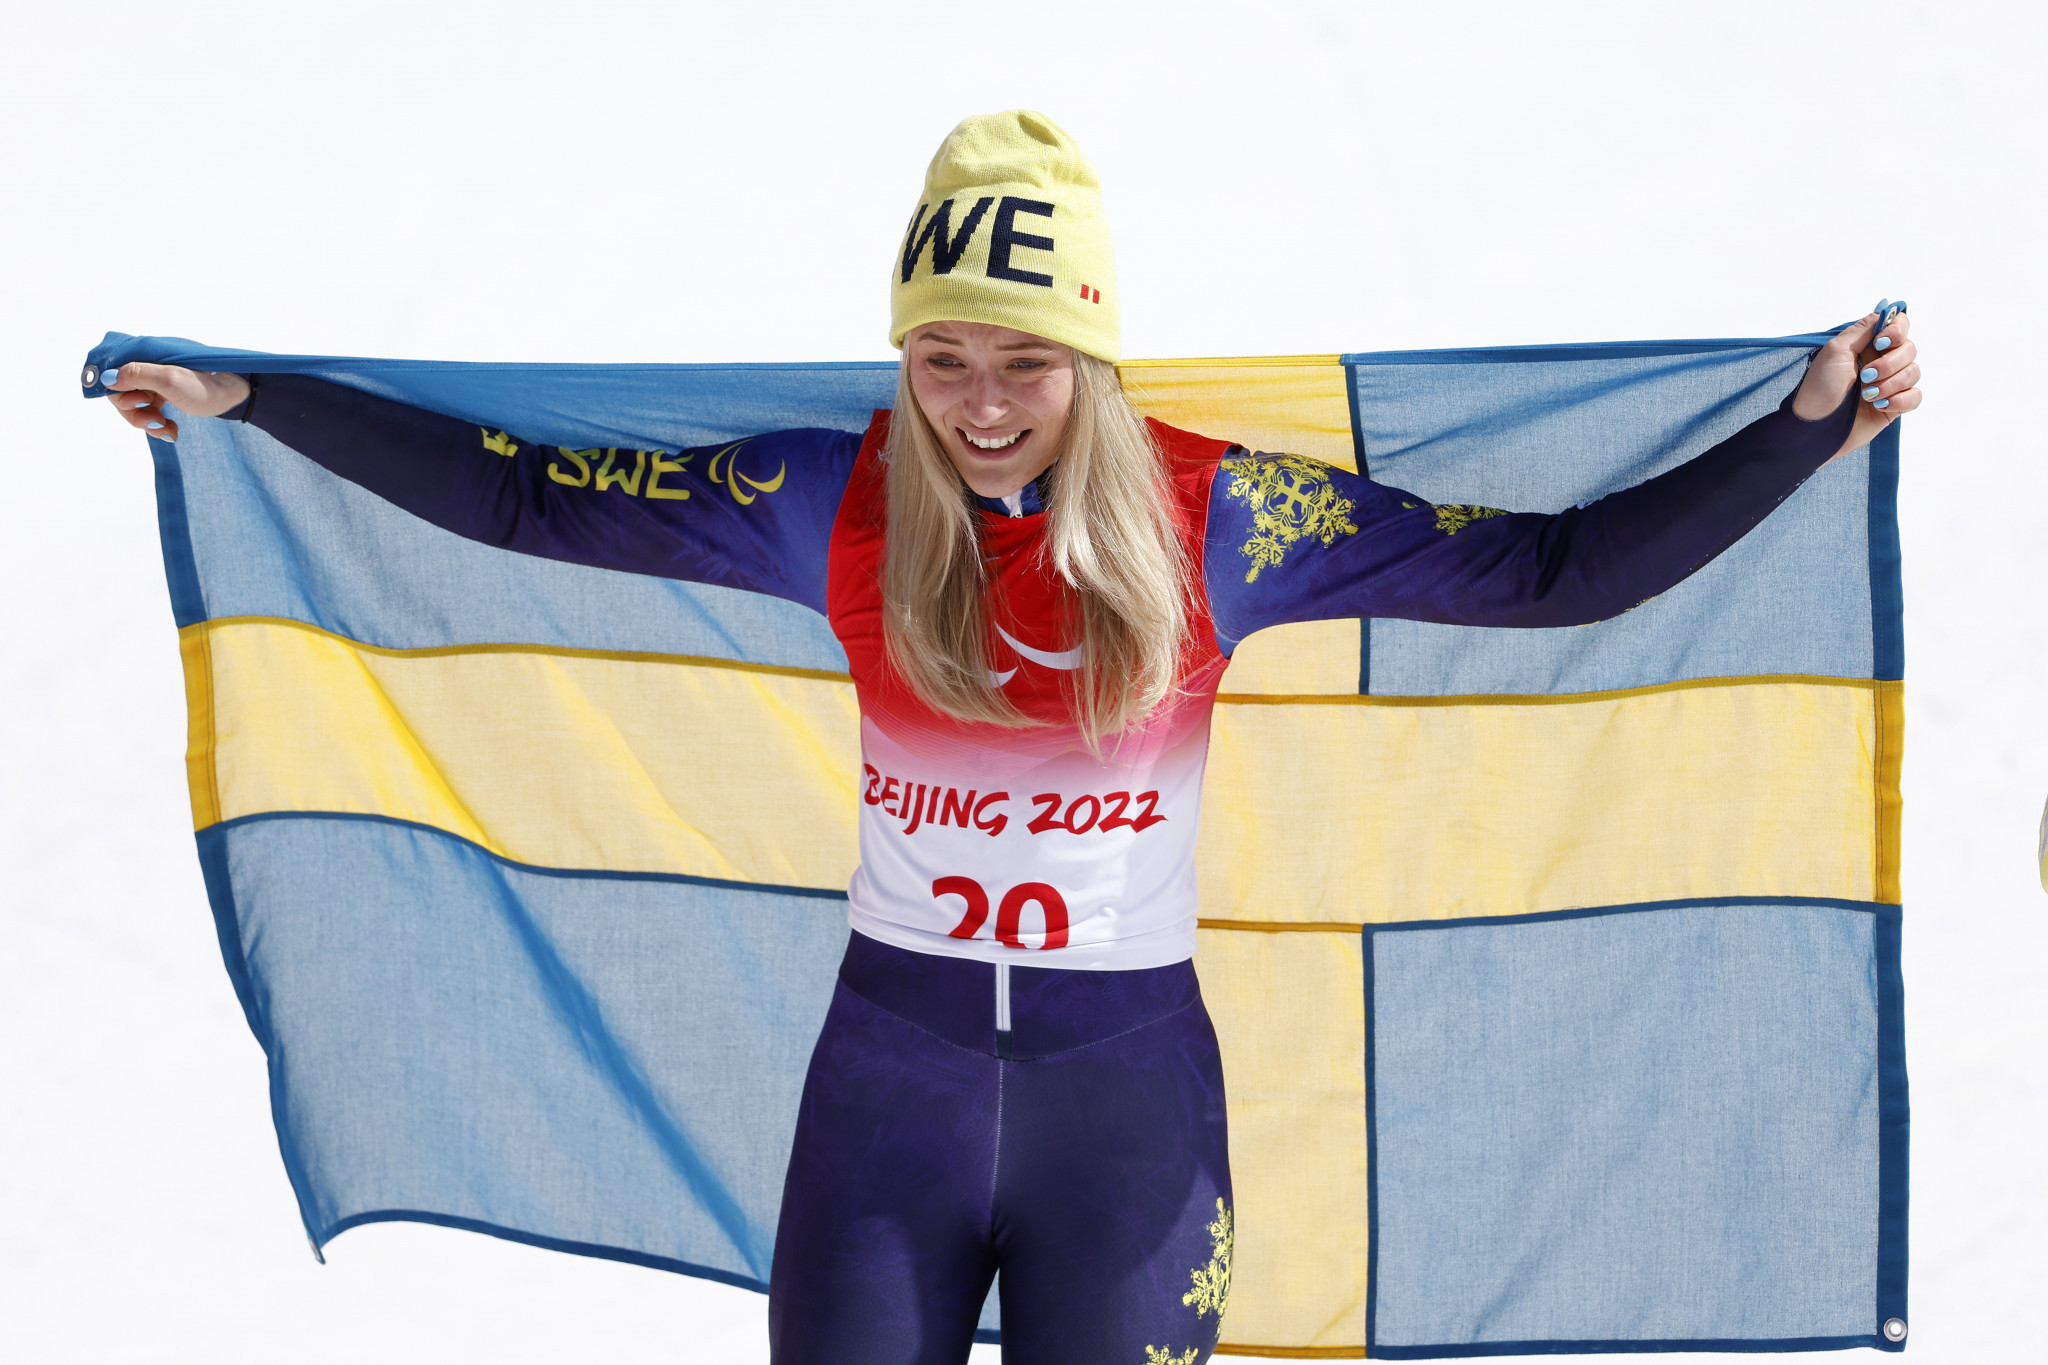 Sweden's Ebba Årsjö added to her super combined victory with gold in the women's slalom standing at the Beijing 2022 Winter Paralympics ©Getty Images 